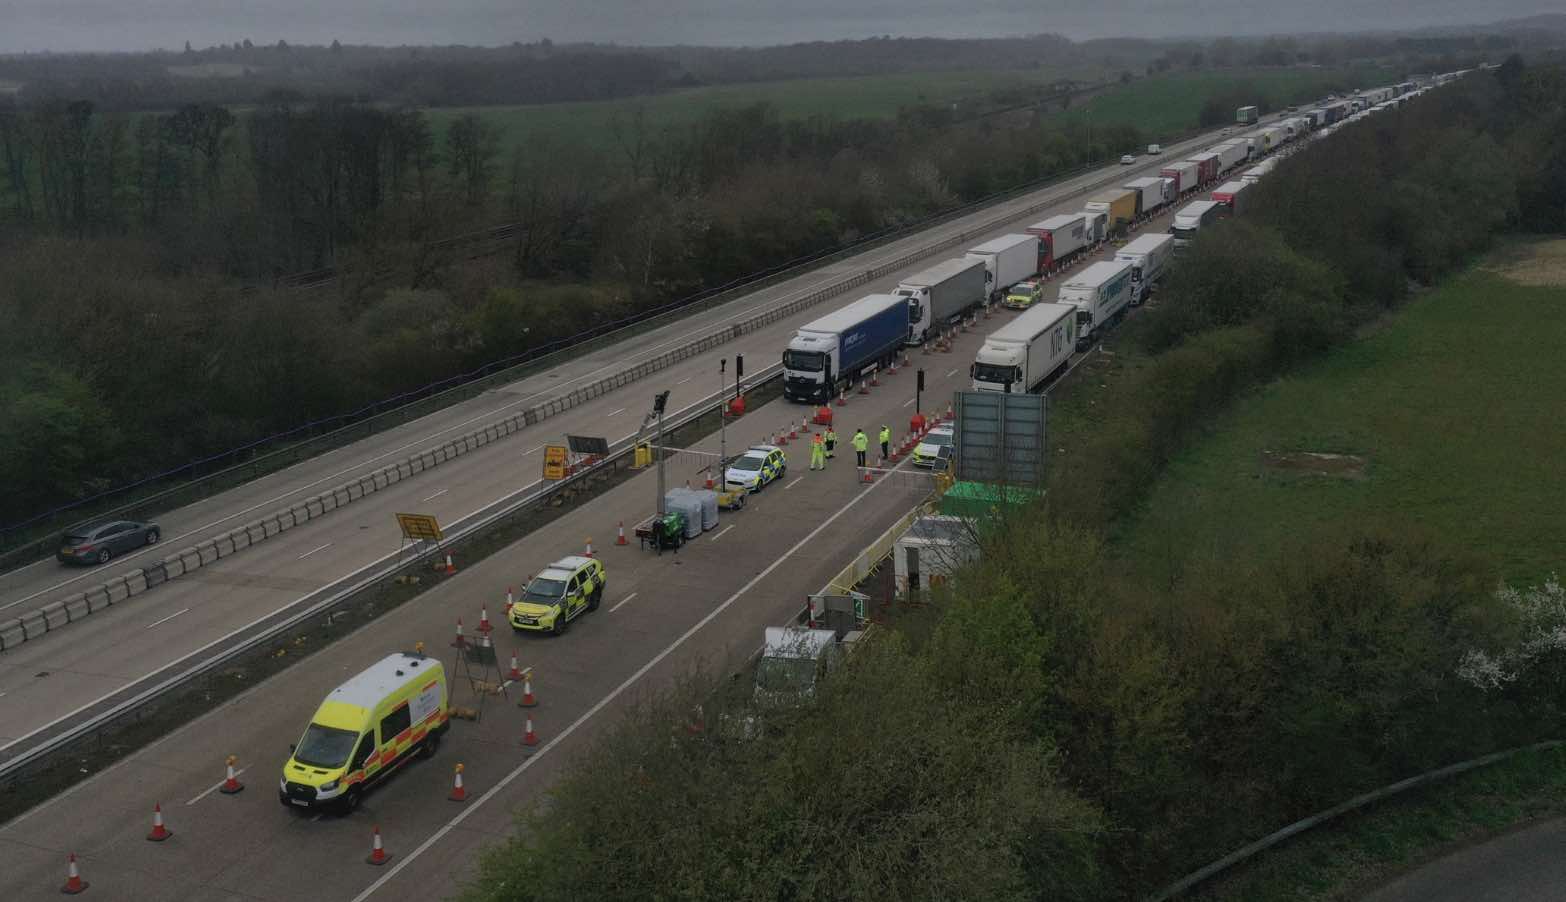 The M20 In Kent Is Closed Coastbound Between J8 (maidstone) And J9 (ashford) To Manage Hgvs And Other Freight Heading For The Port Of Dover Or Eurotunnel As Part Of Operation Brock